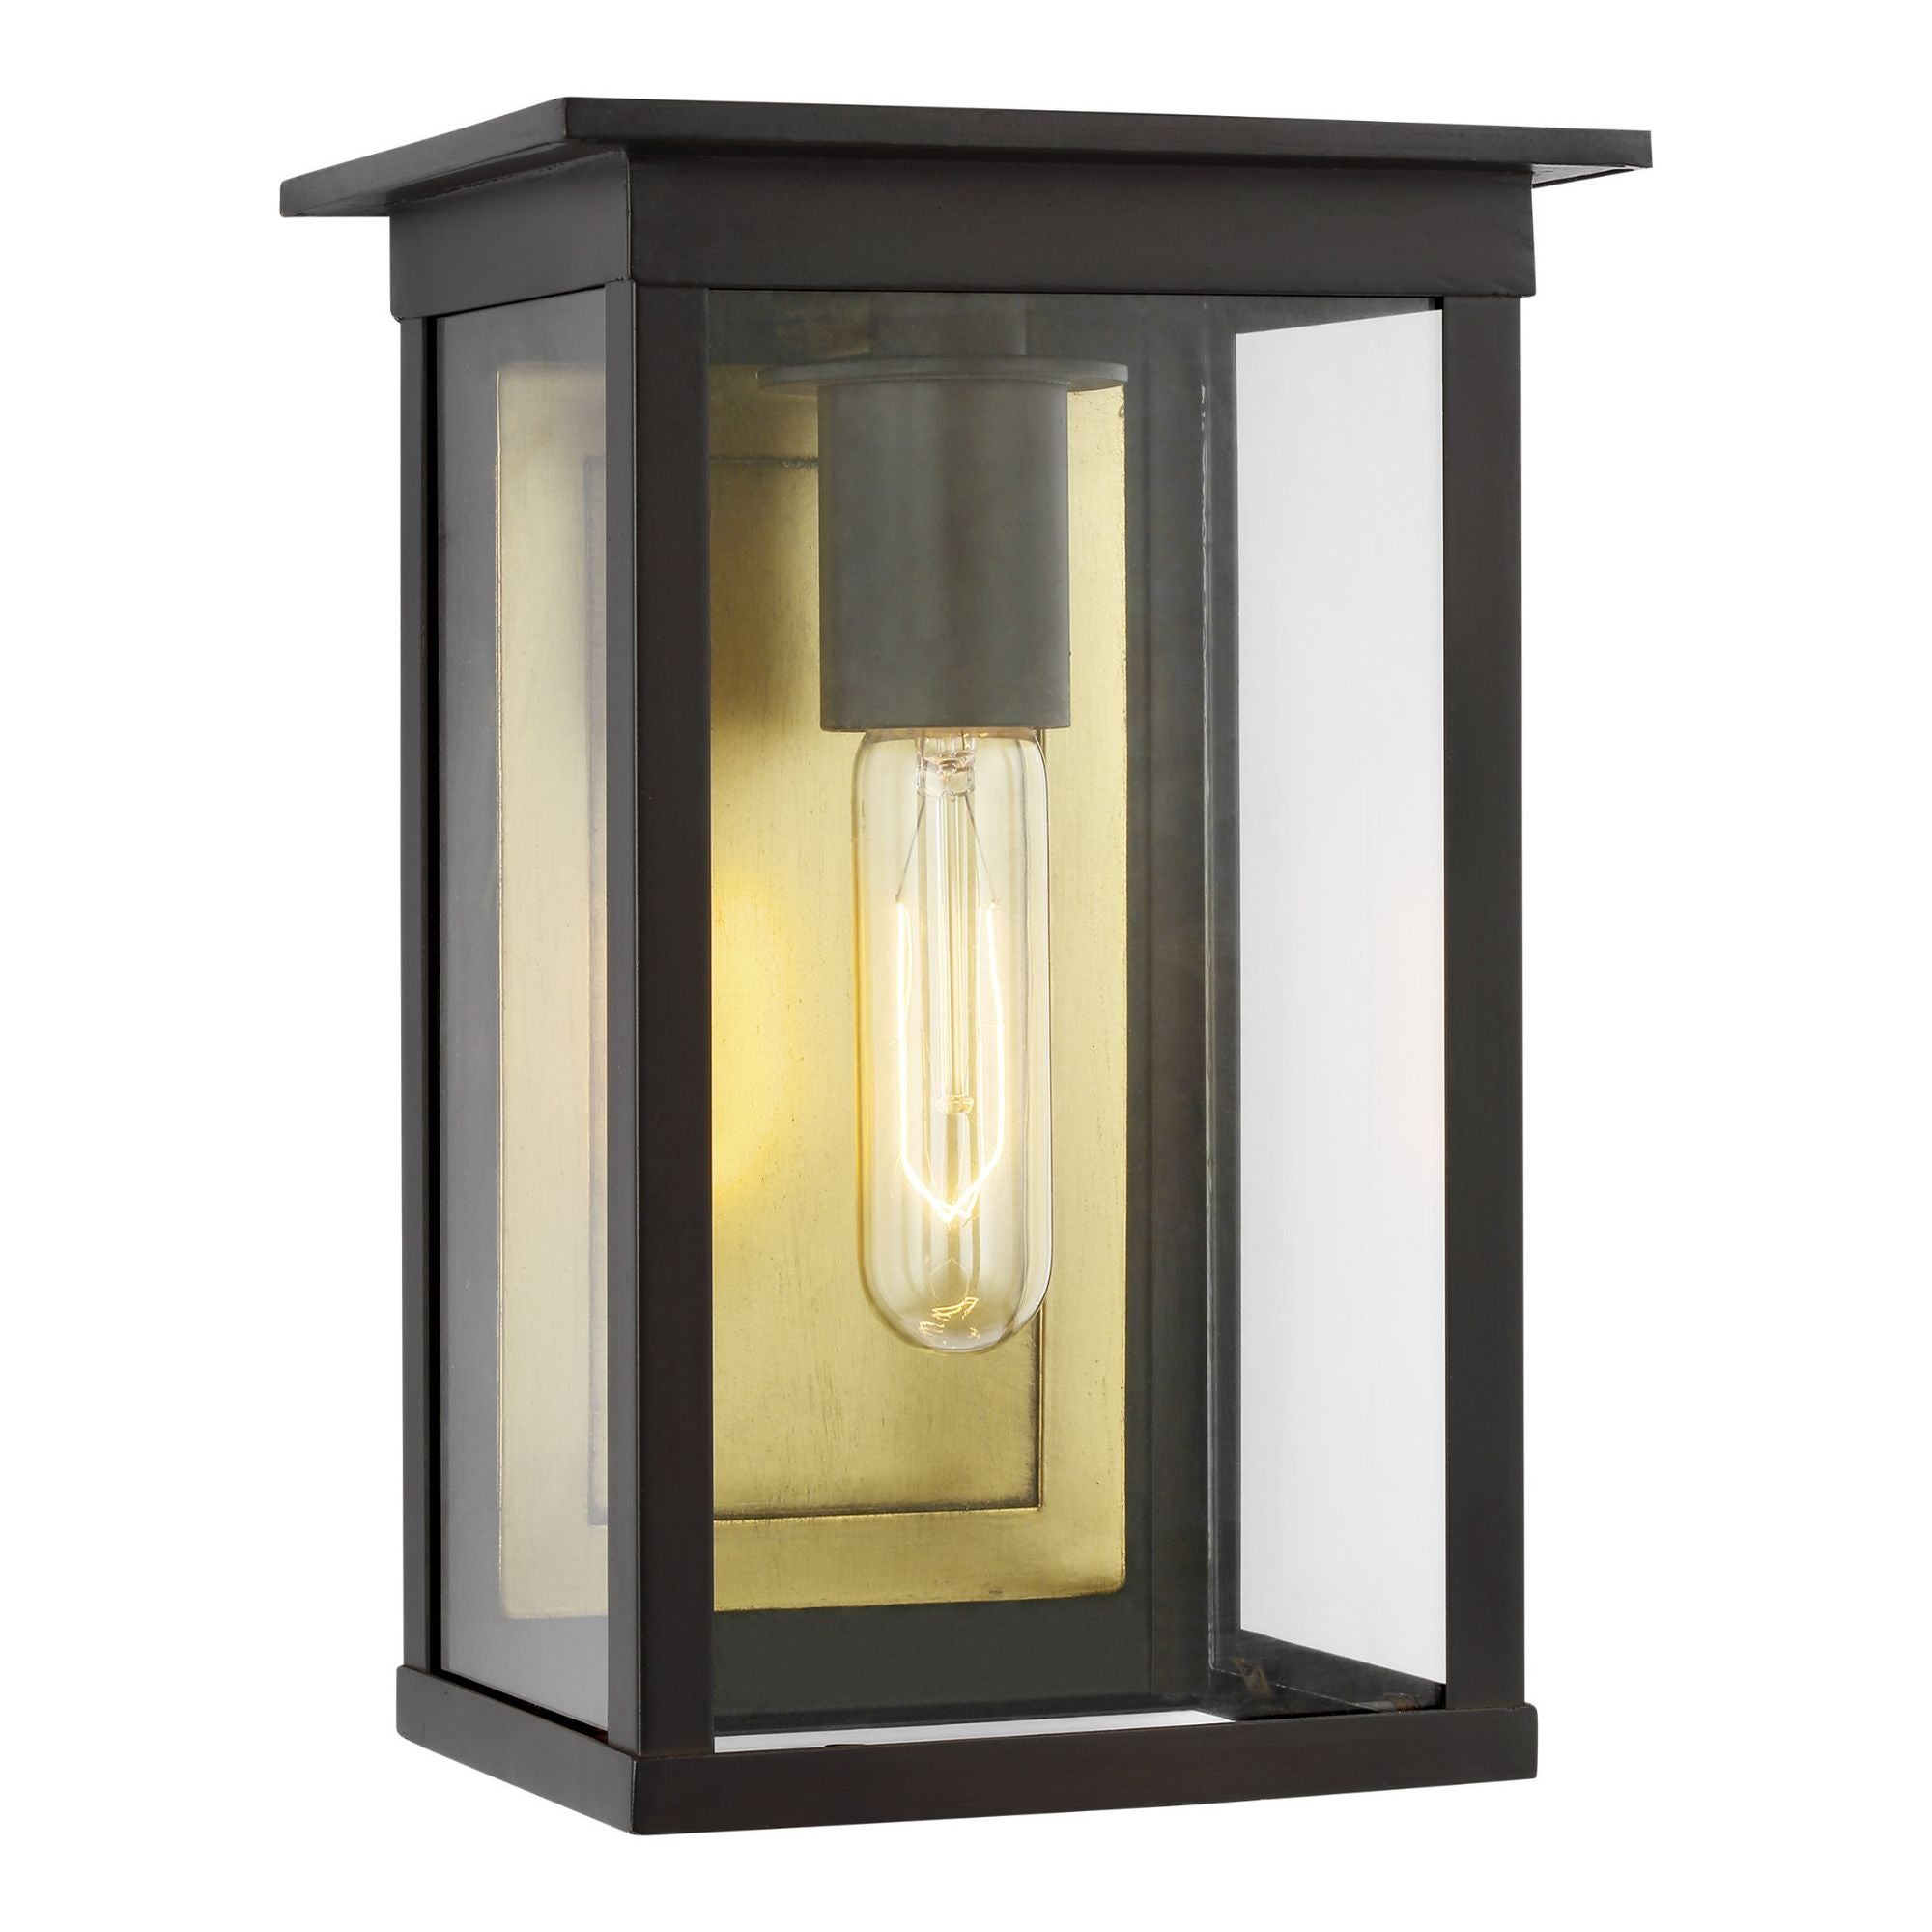 Chapman & Myers Freeport Small Outdoor Wall Lantern in Heritage Copper